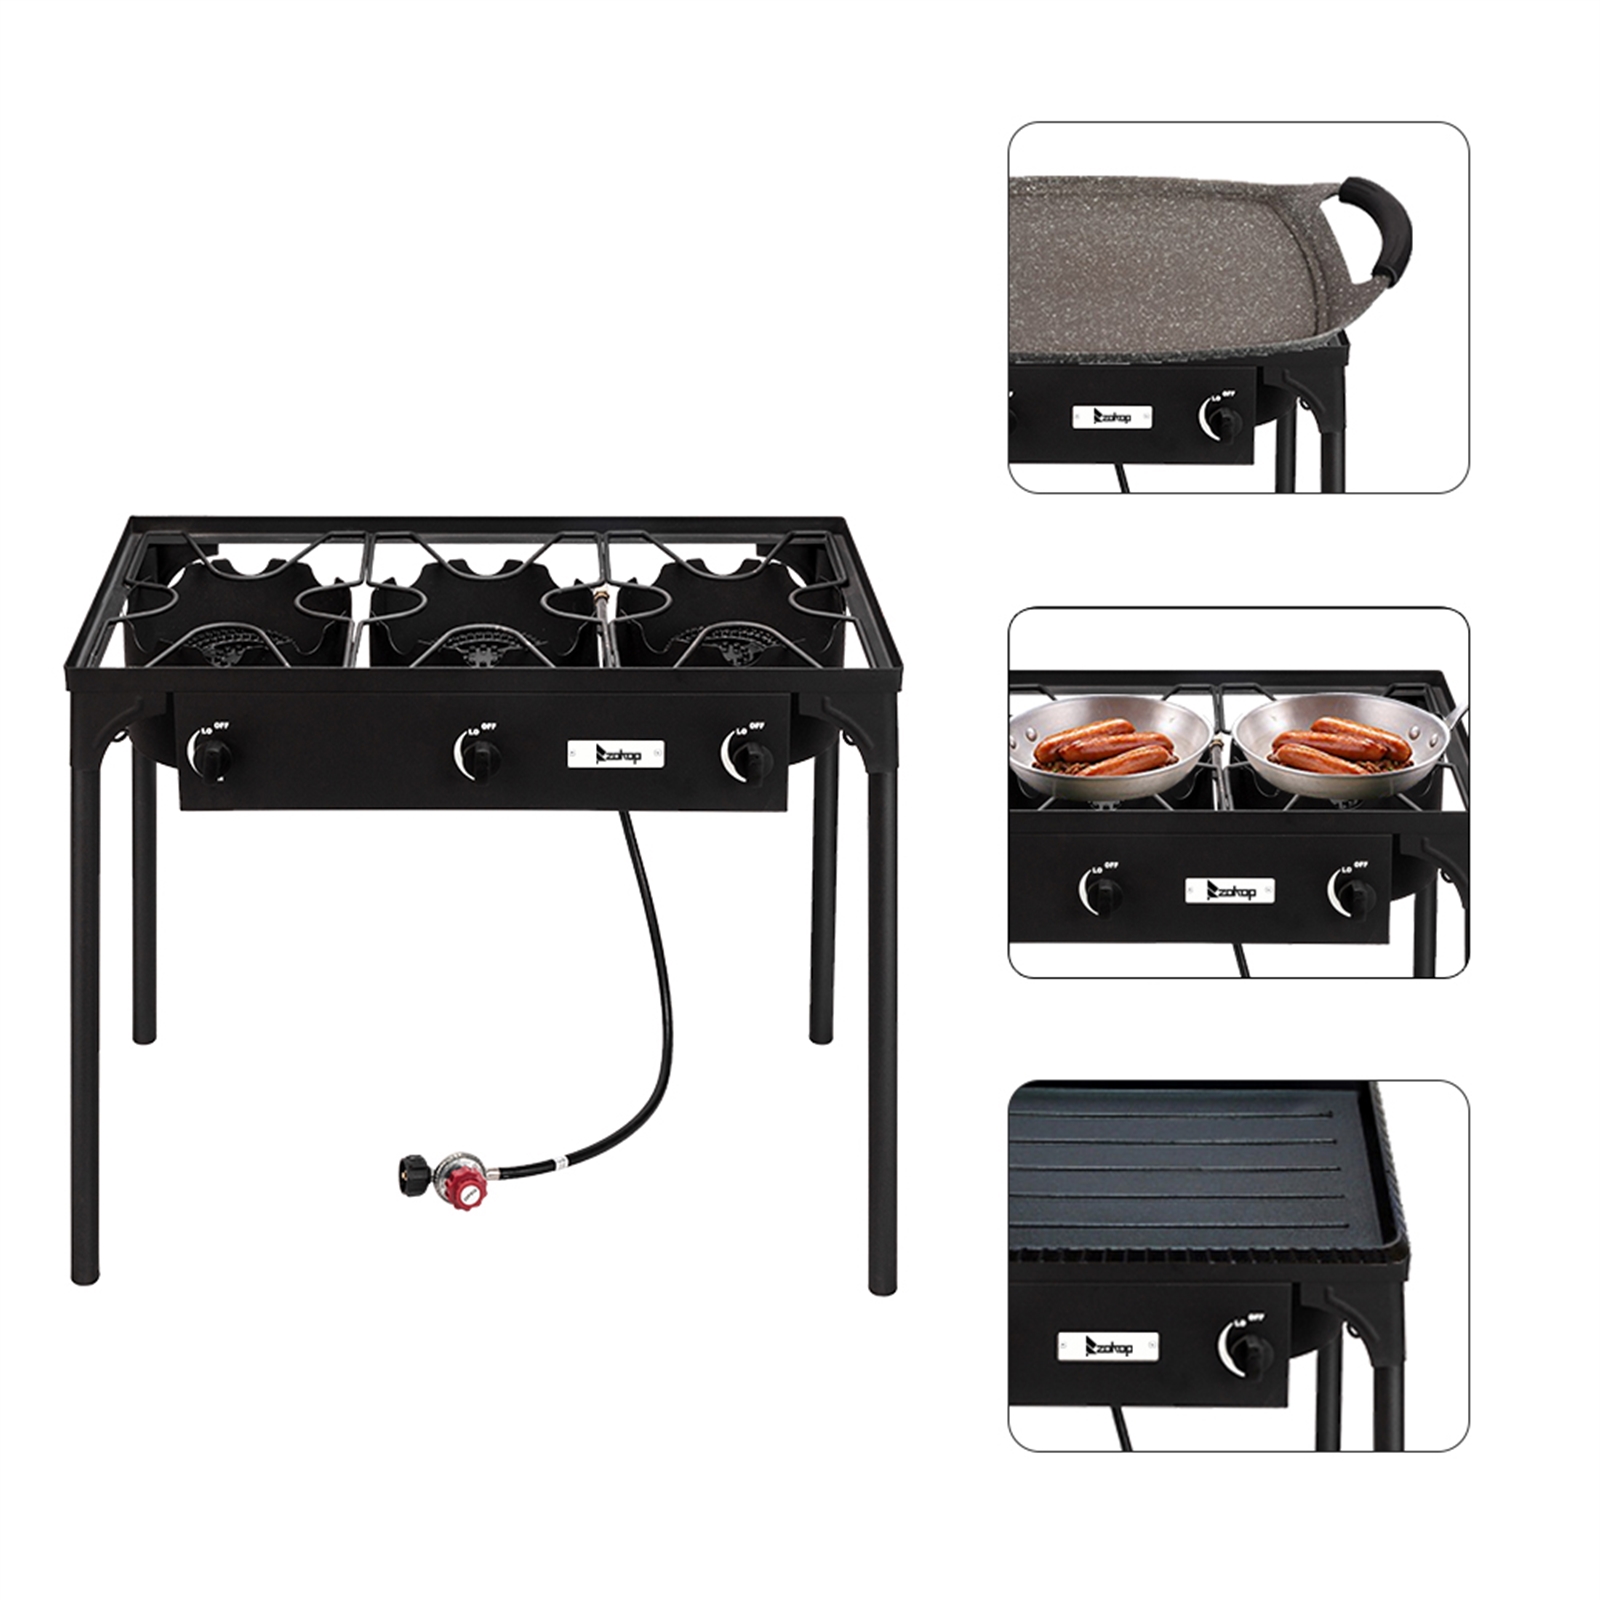 Outdoor Camp Stove, Three Burner Stove, 225, 000 BTU Portable High Pressure Propane-Powered Cooktop with Removable Legs, Portable Cast Iron Patio Cooking Burner Gas Cooker - image 4 of 9